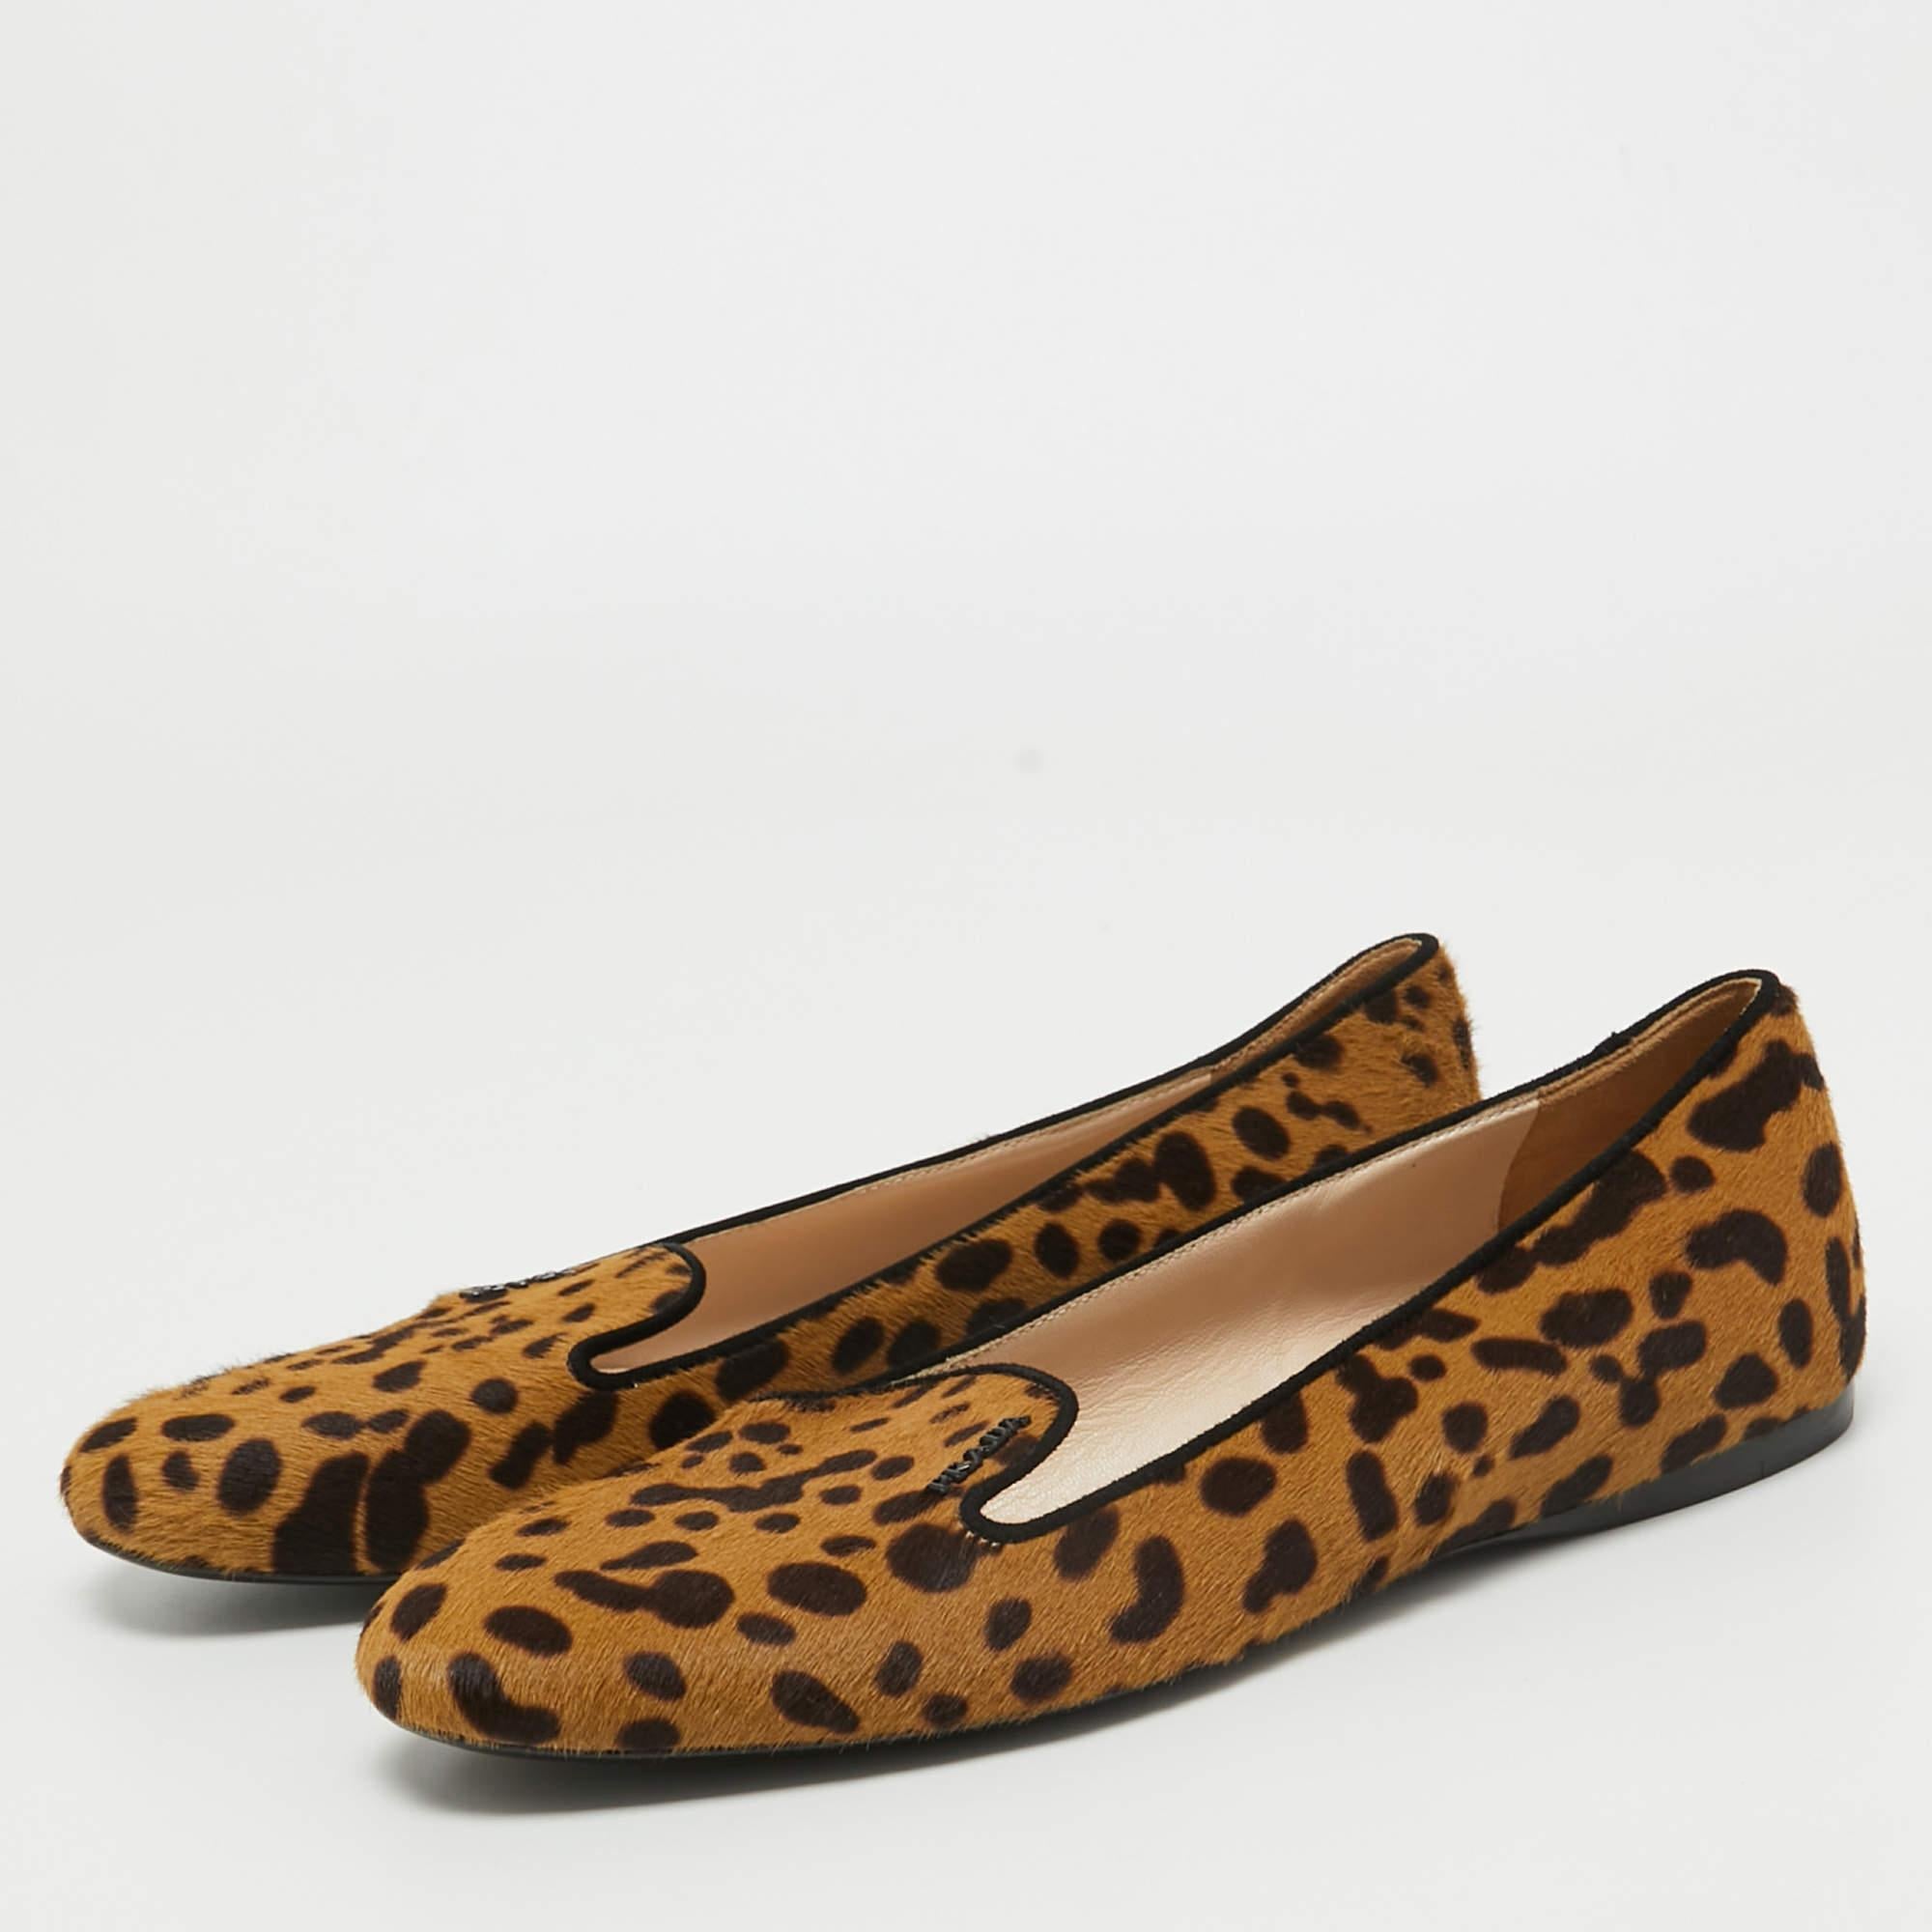 A leopard print piece is instantly coveted, especially if it's by the one and only Prada. This pair of Smoking slippers has the excellence of calf hair fashioned beautifully with leather insoles. Great to team up with casual looks.

